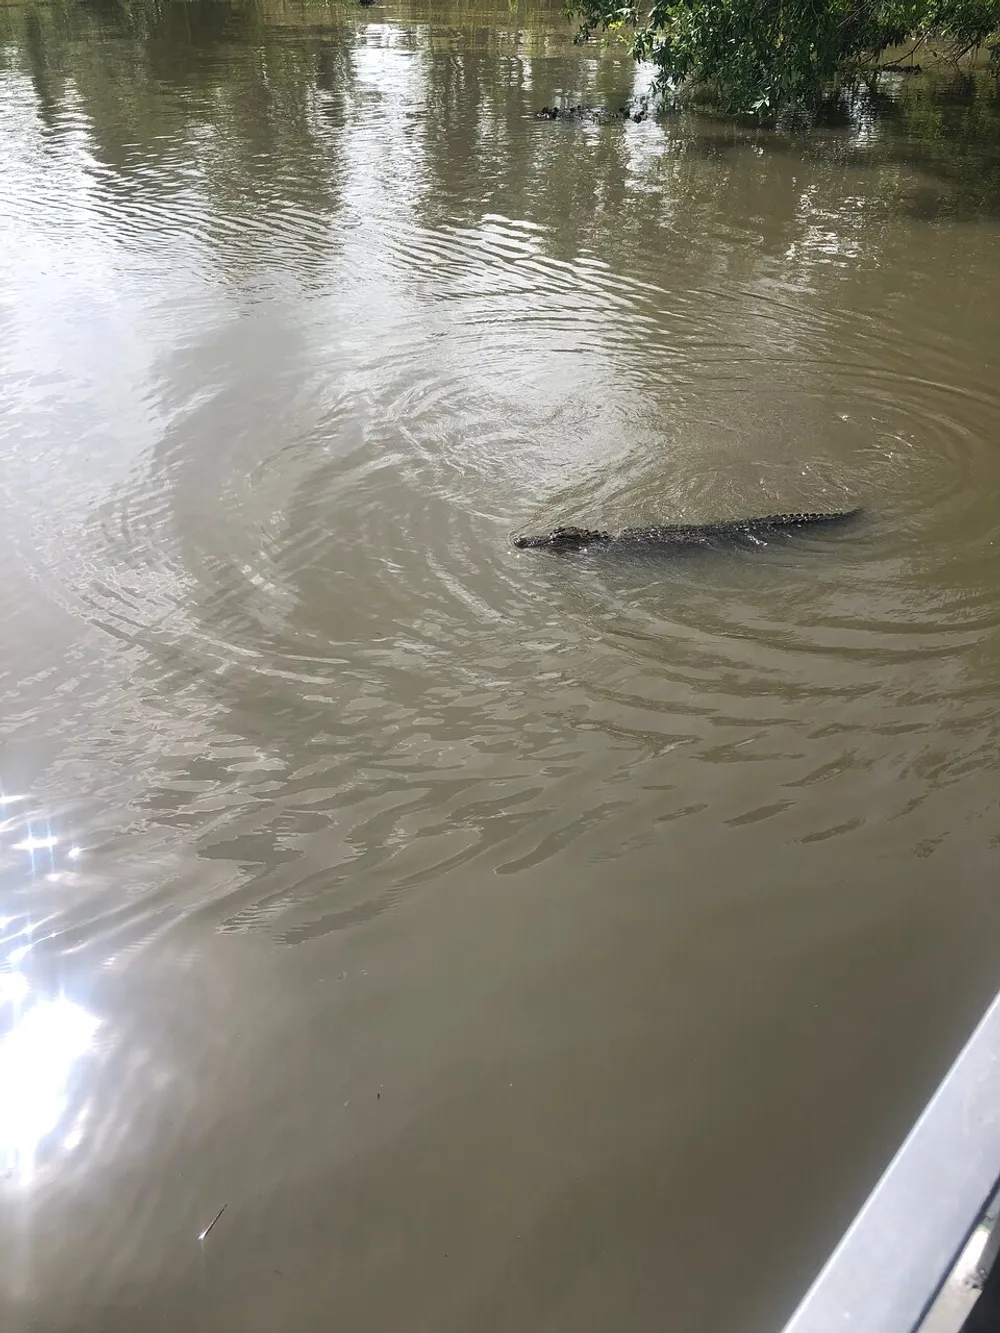 An alligator is swimming in murky water near the edge of a boat